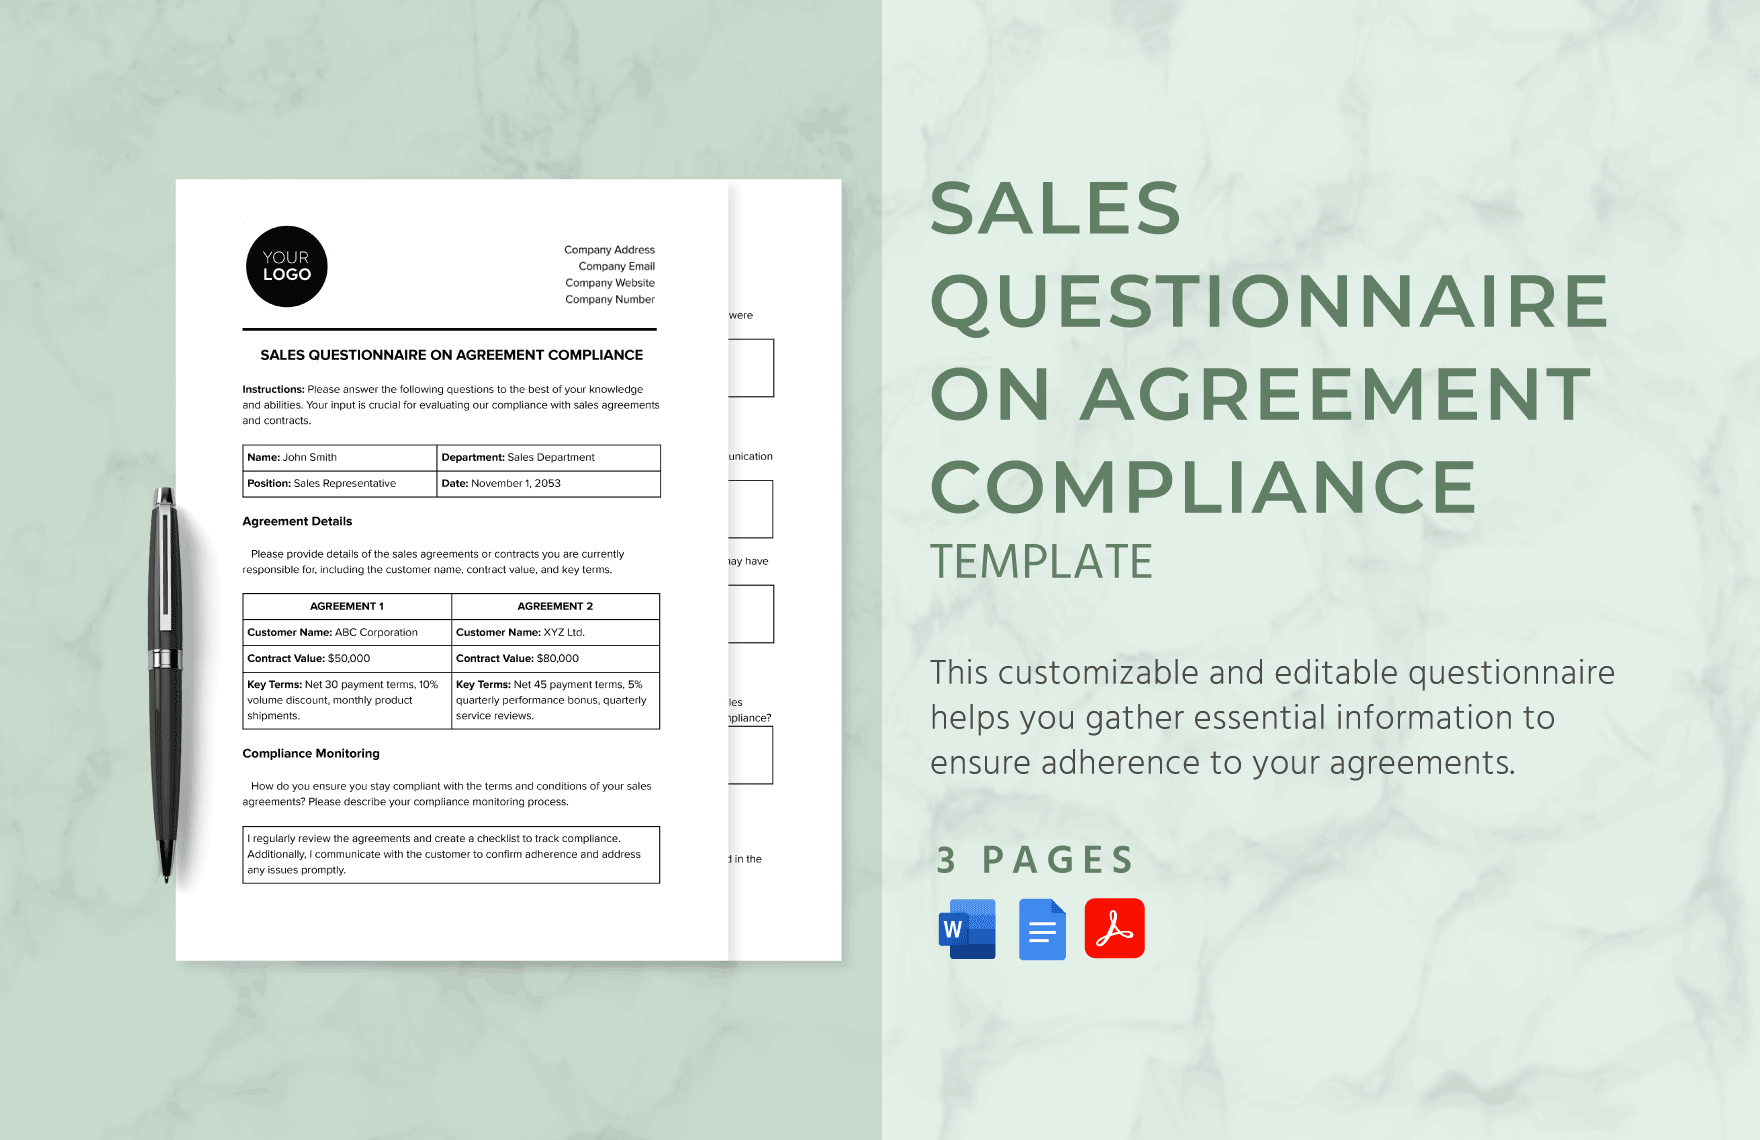 Sales Questionnaire on Agreement Compliance Template in Word, Google Docs, PDF